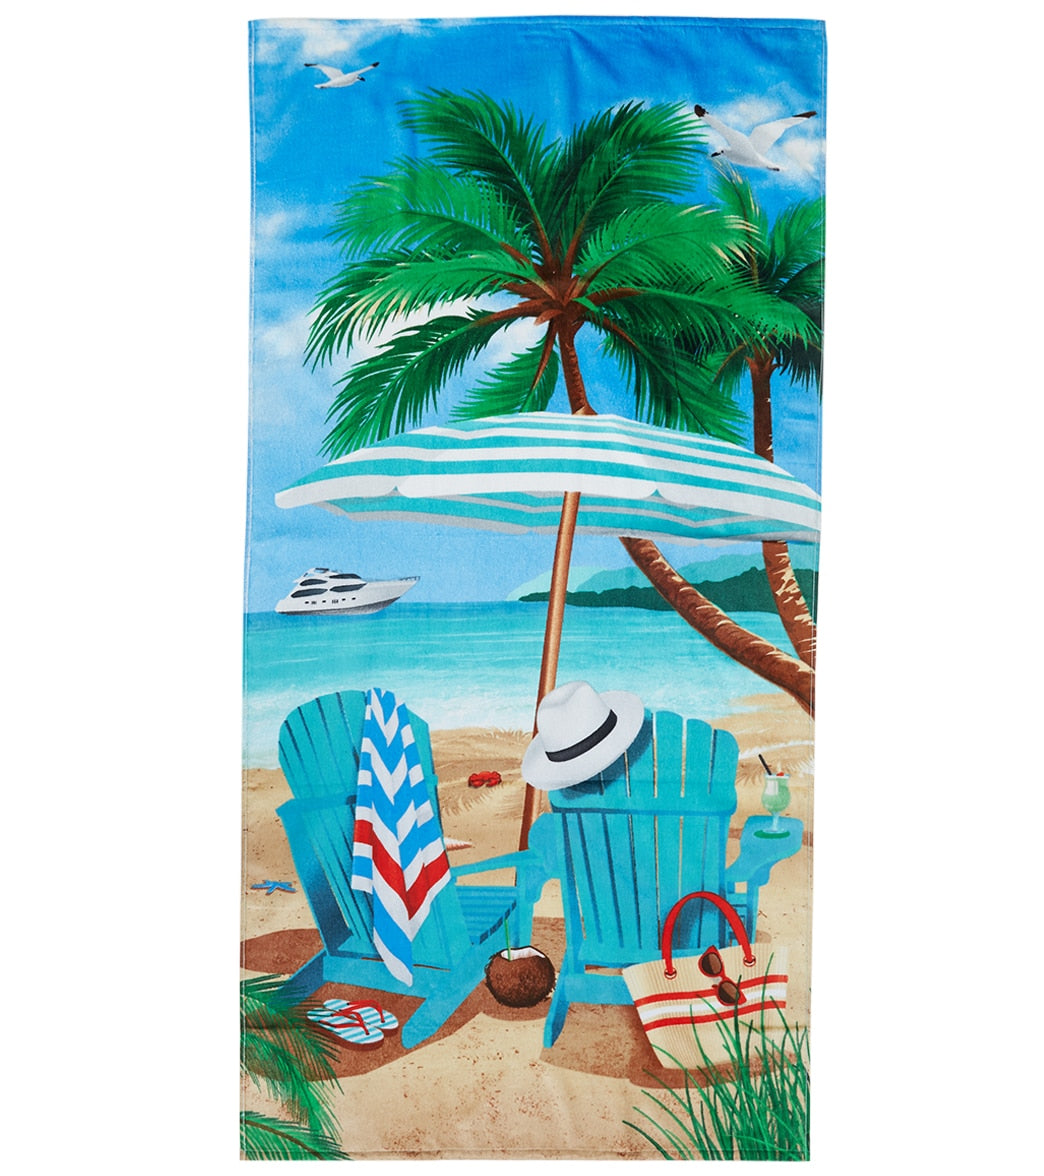 Dohler Beach Chairs And Palms Beach Towel 30”X 60” at SwimOutlet.com